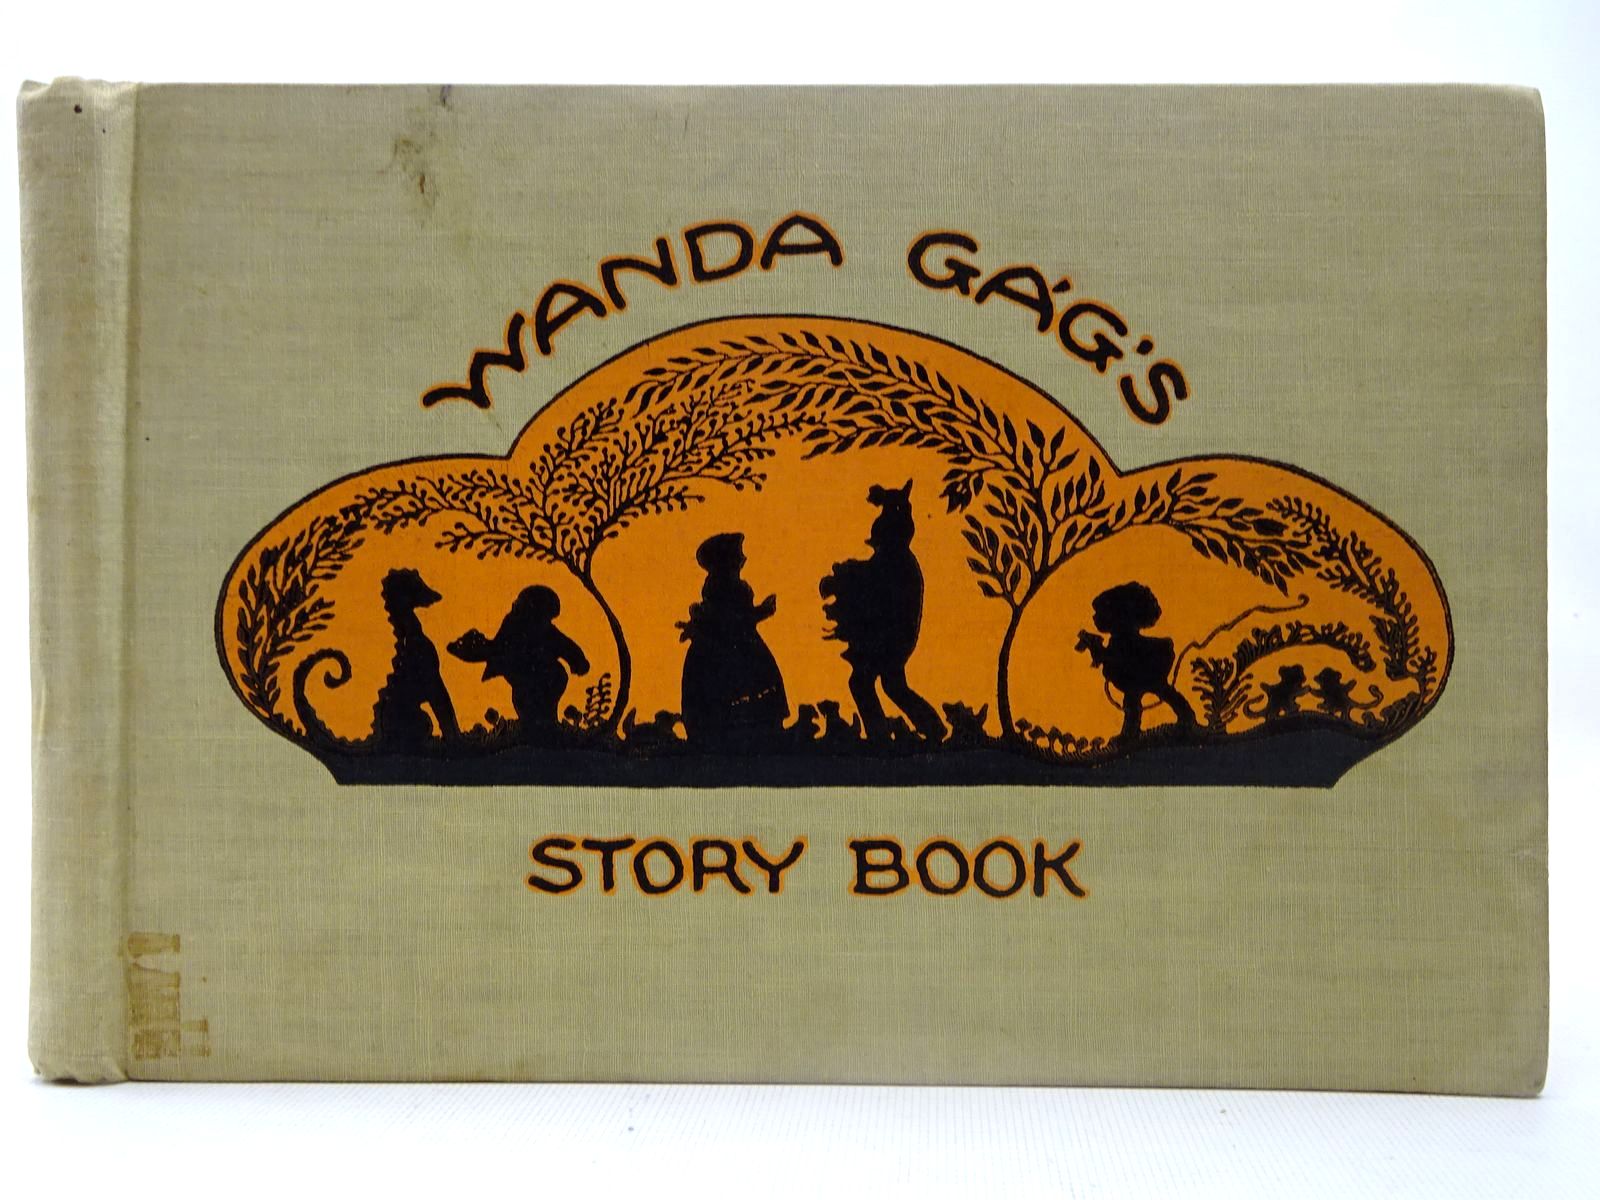 Photo of WANDA GAGG'S STORY BOOK written by Gagg, Wanda published by Coward-McCann Inc. (STOCK CODE: 2127231)  for sale by Stella & Rose's Books